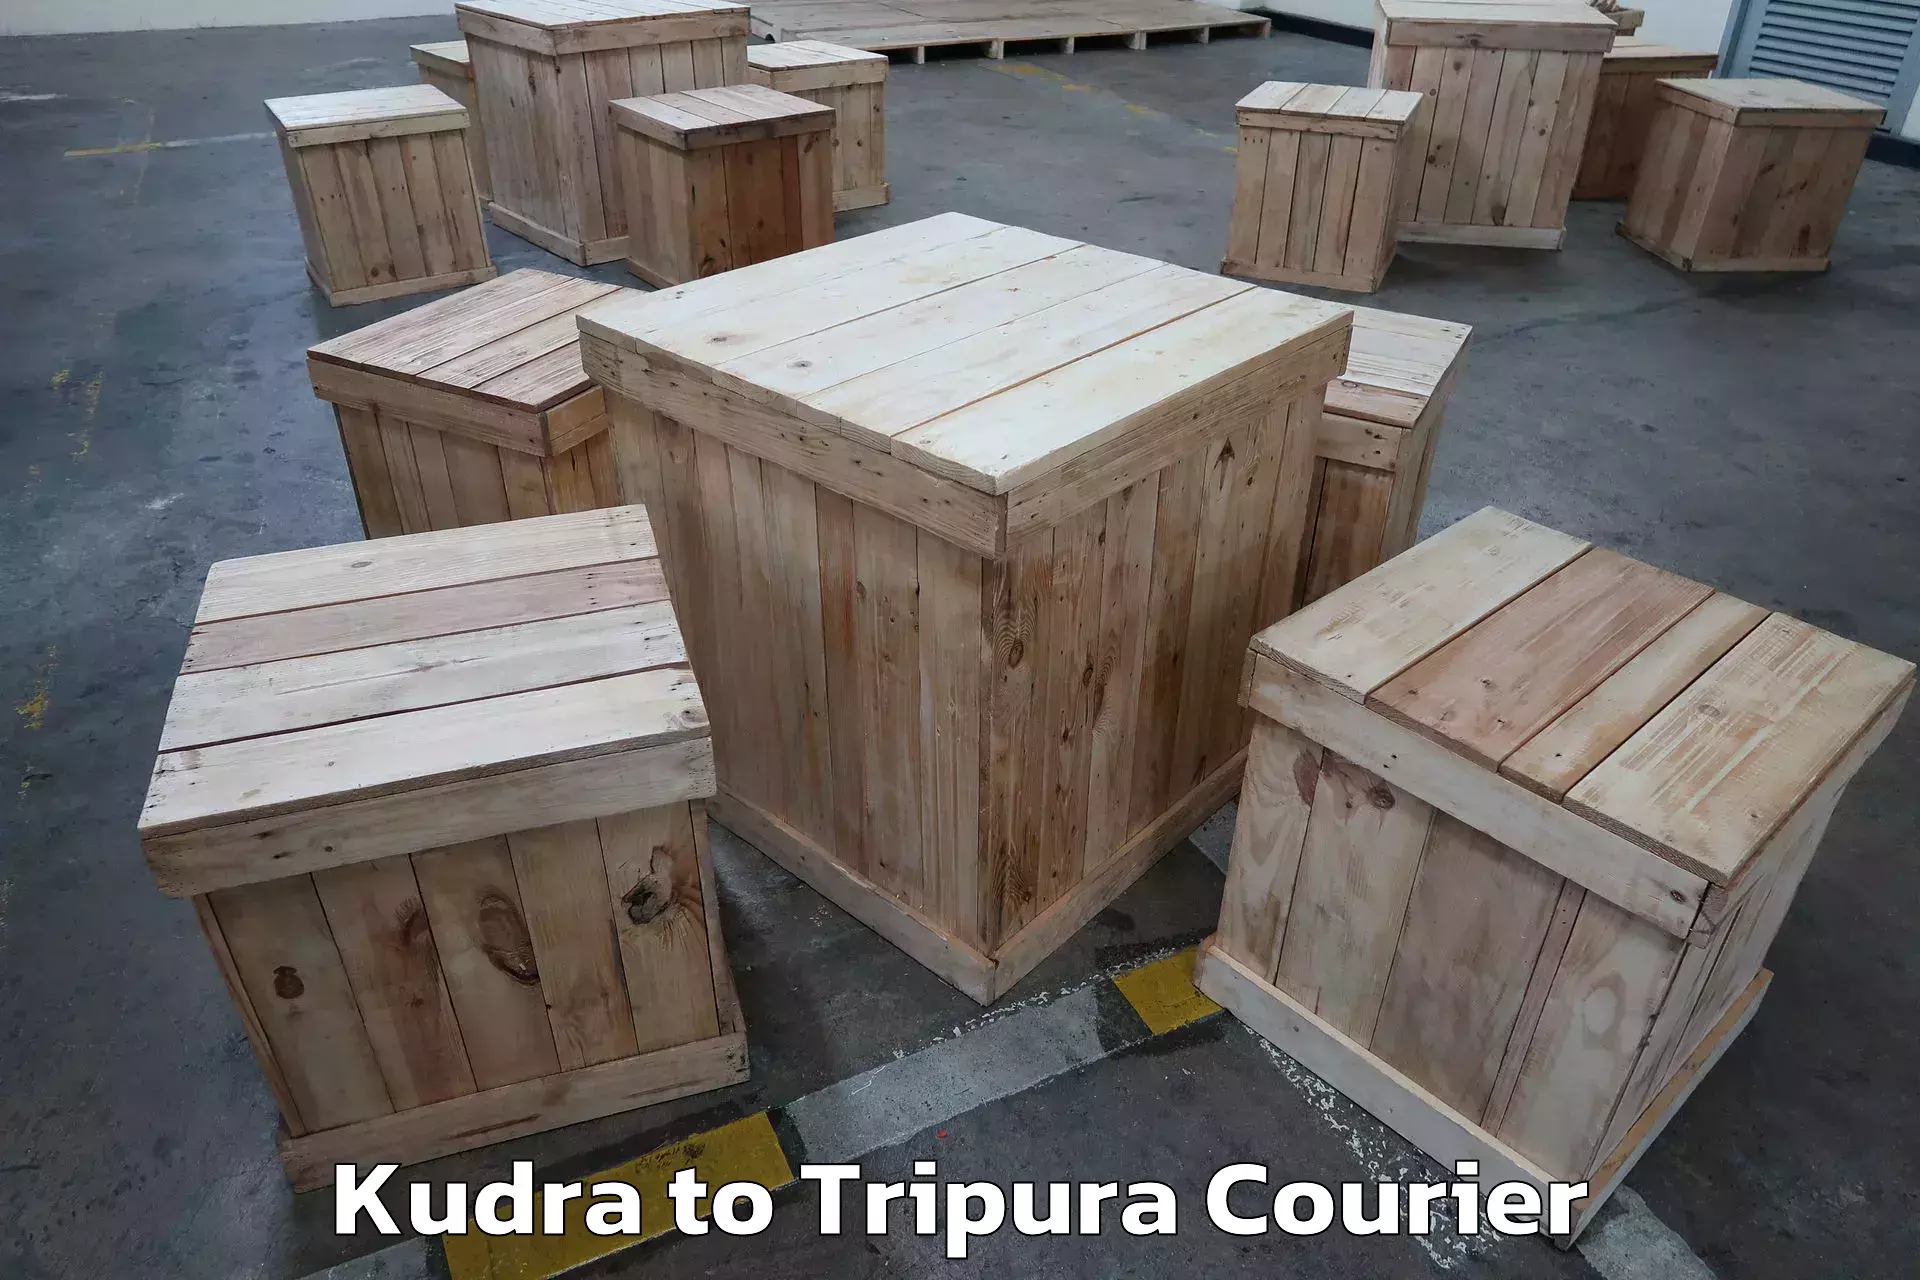 Efficient packing and moving Kudra to Udaipur Tripura